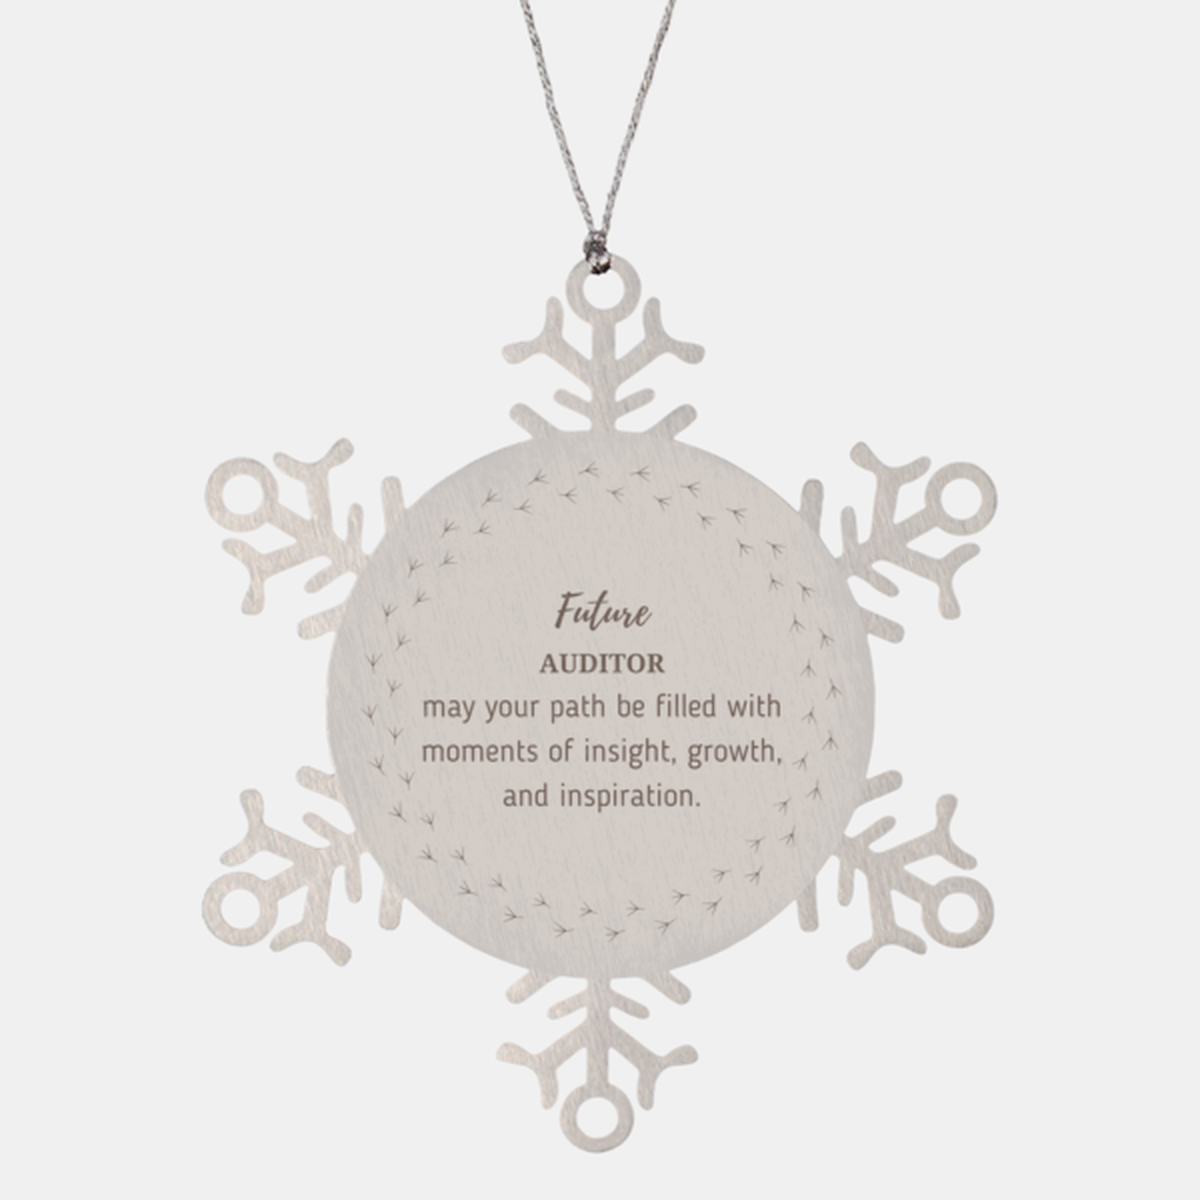 Future Auditor Gifts, May your path be filled with moments of insight, Graduation Gifts for New Auditor, Christmas Unique Snowflake Ornament For Men, Women, Friends